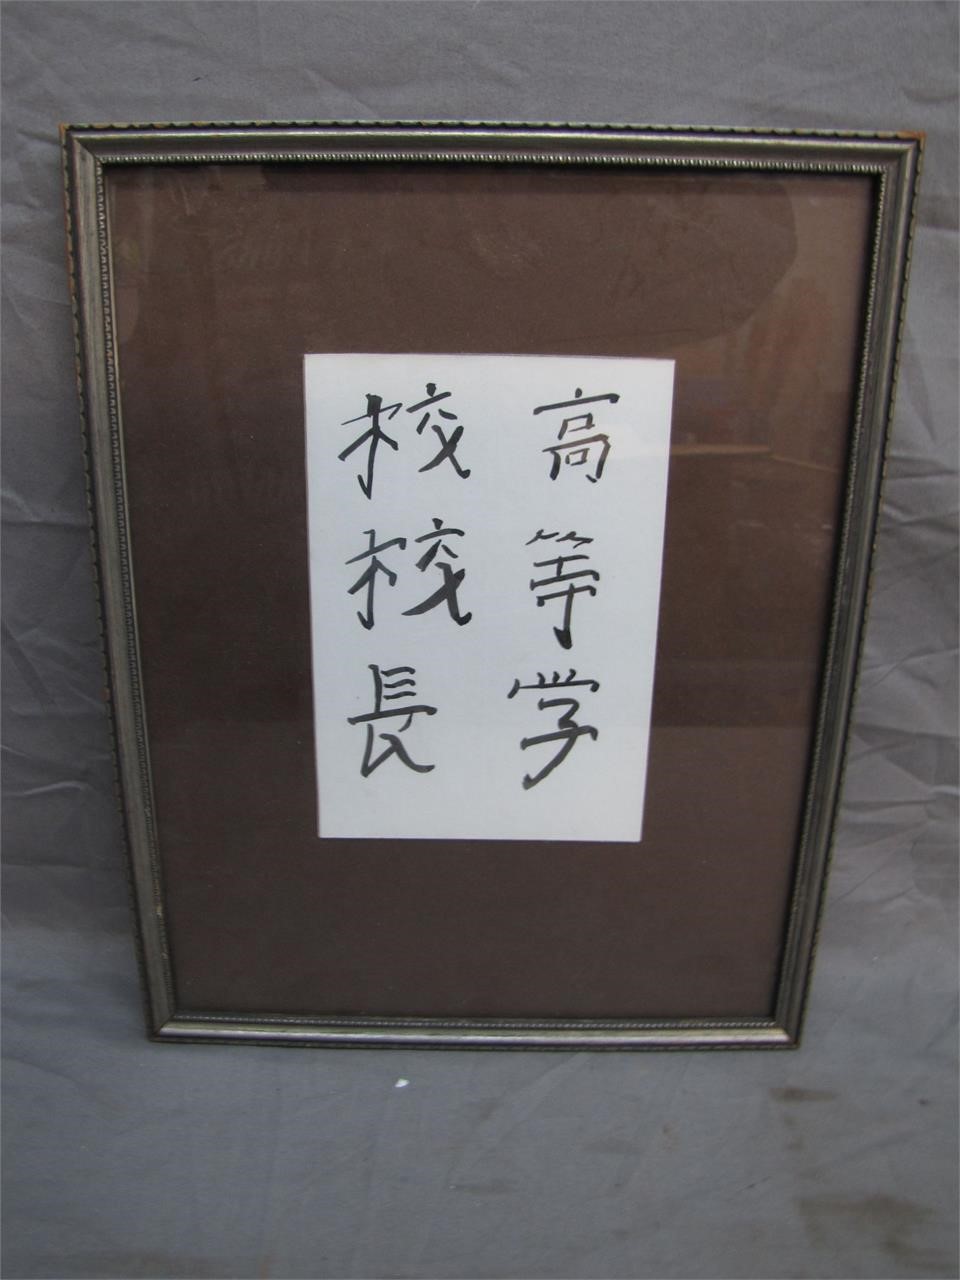 Chinese Hieroglyphic Painting Framed & Matted